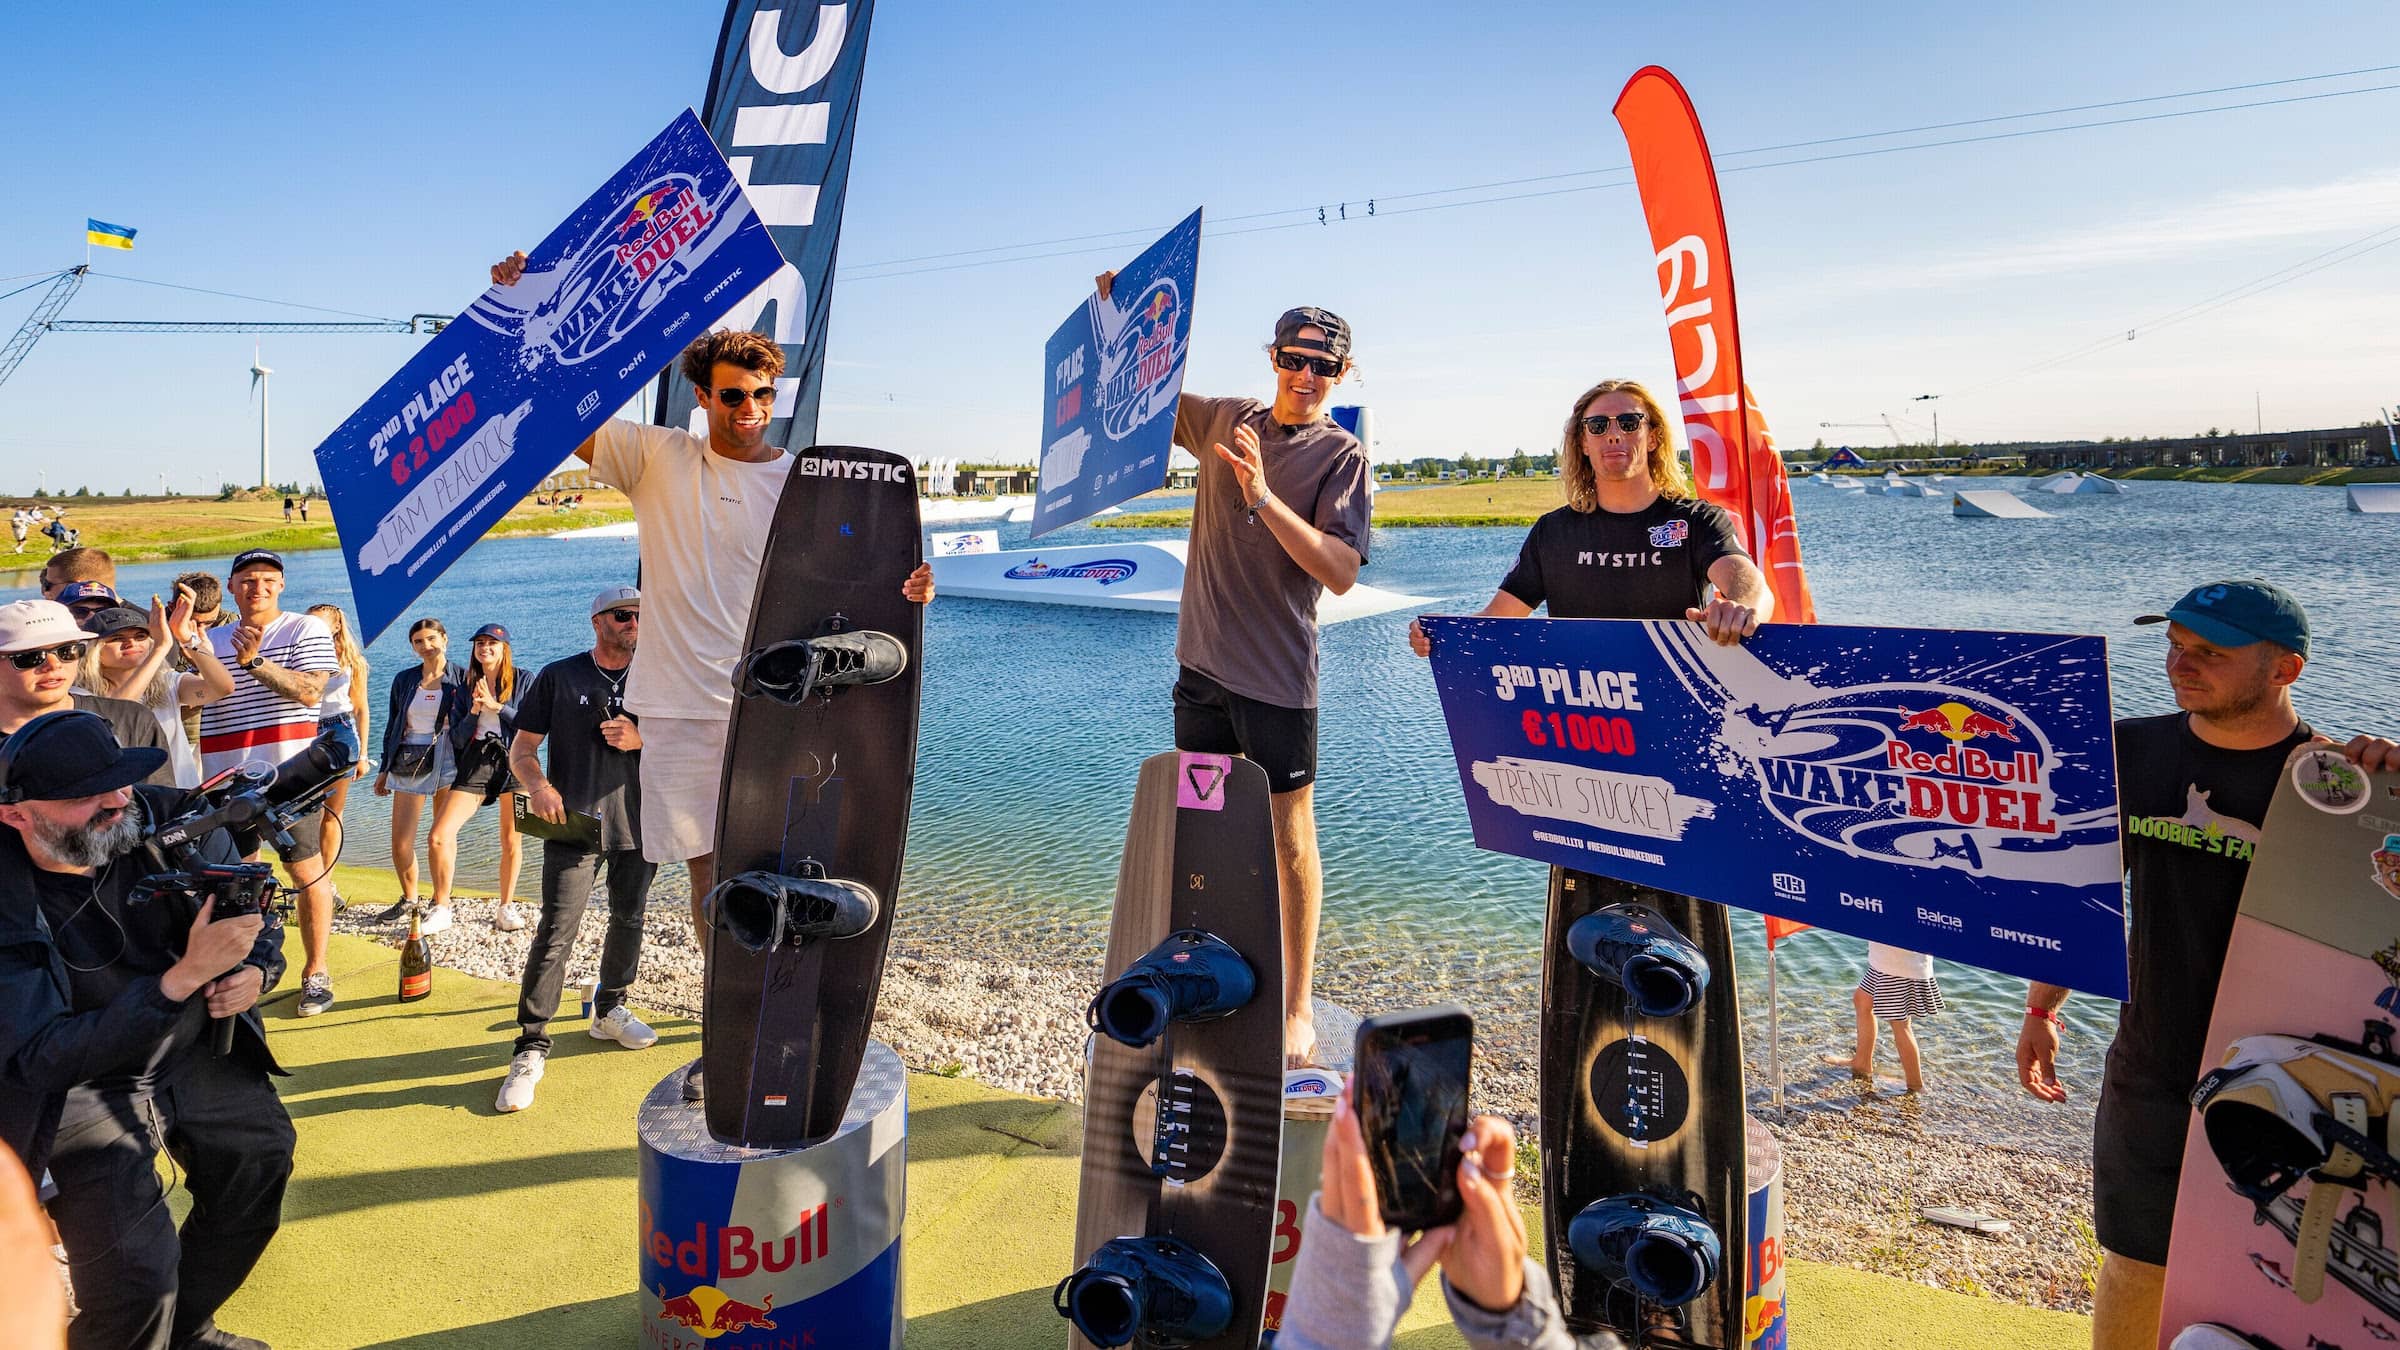 Young generation of hedrick and stuckey win at red bull wakeduel event 2023